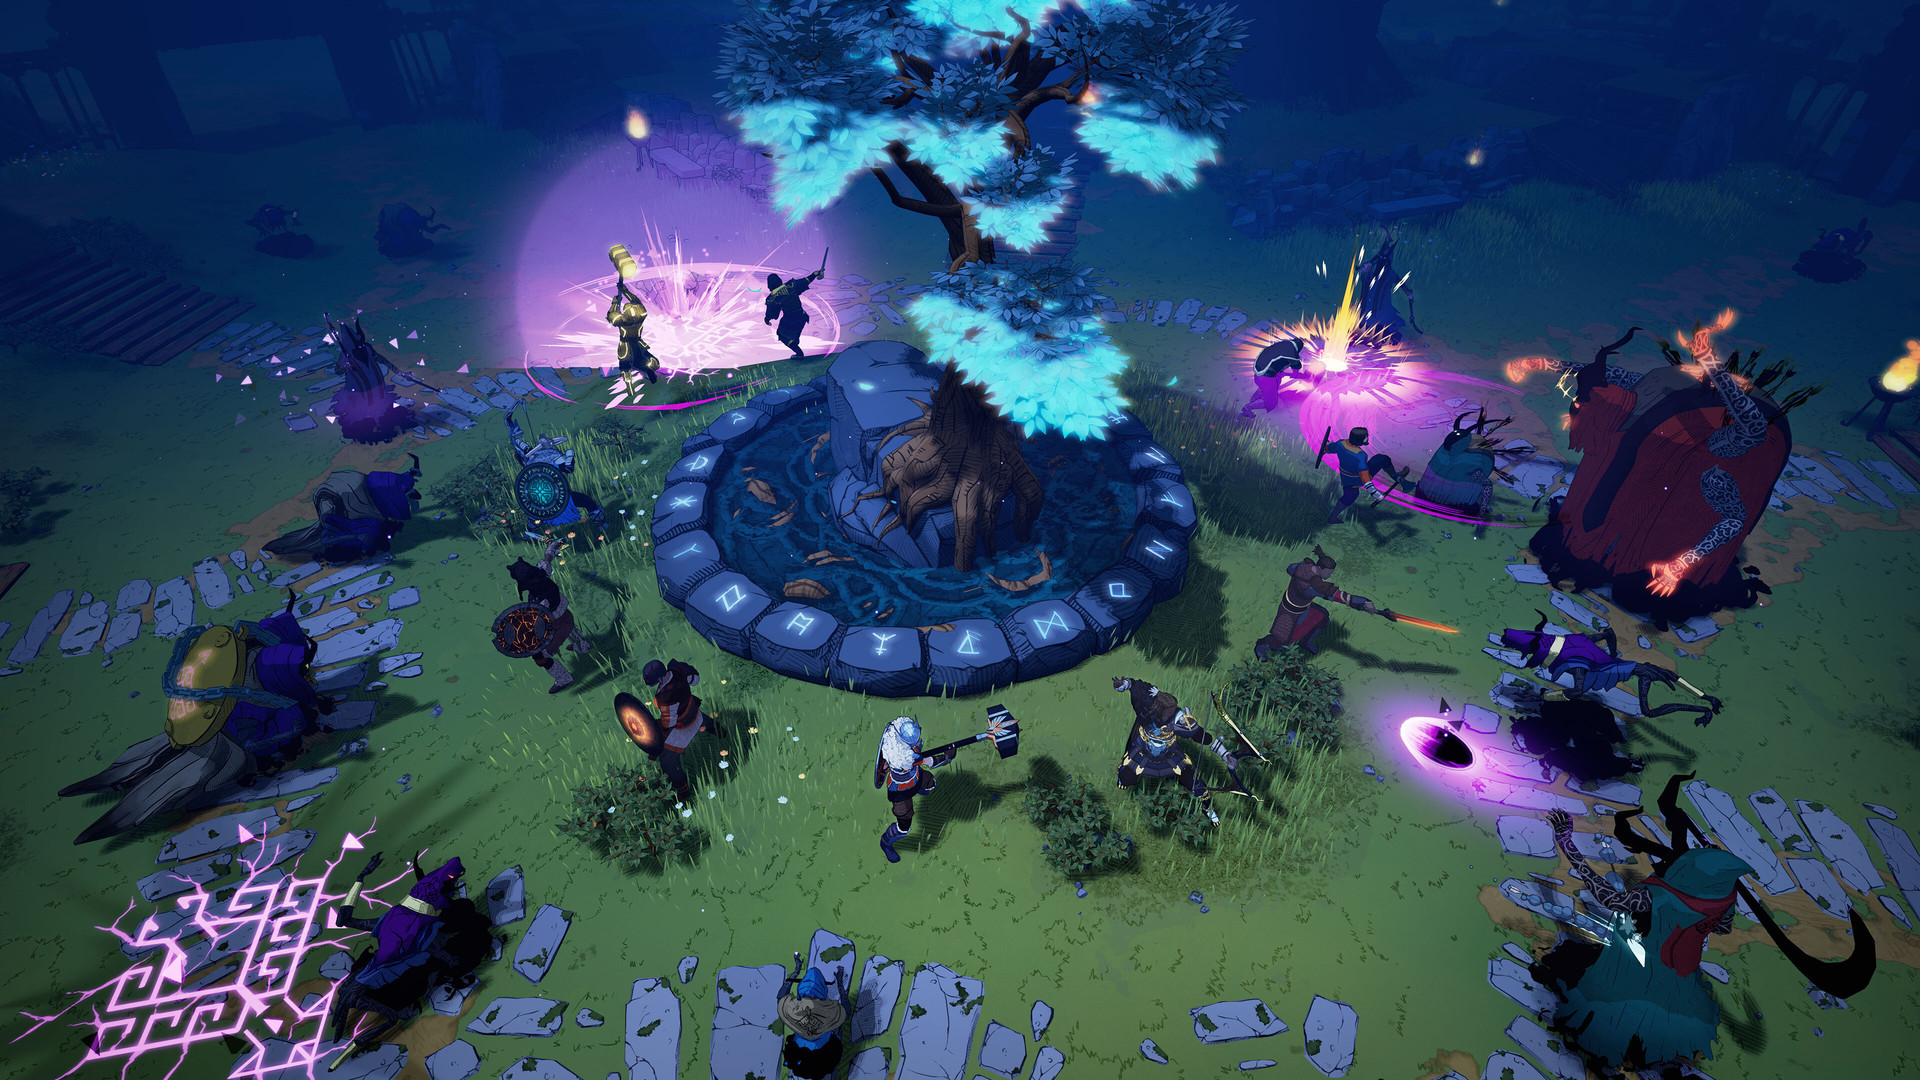 Wildfire review: hide-and-seek in a medieval village of the damned, Strategy games